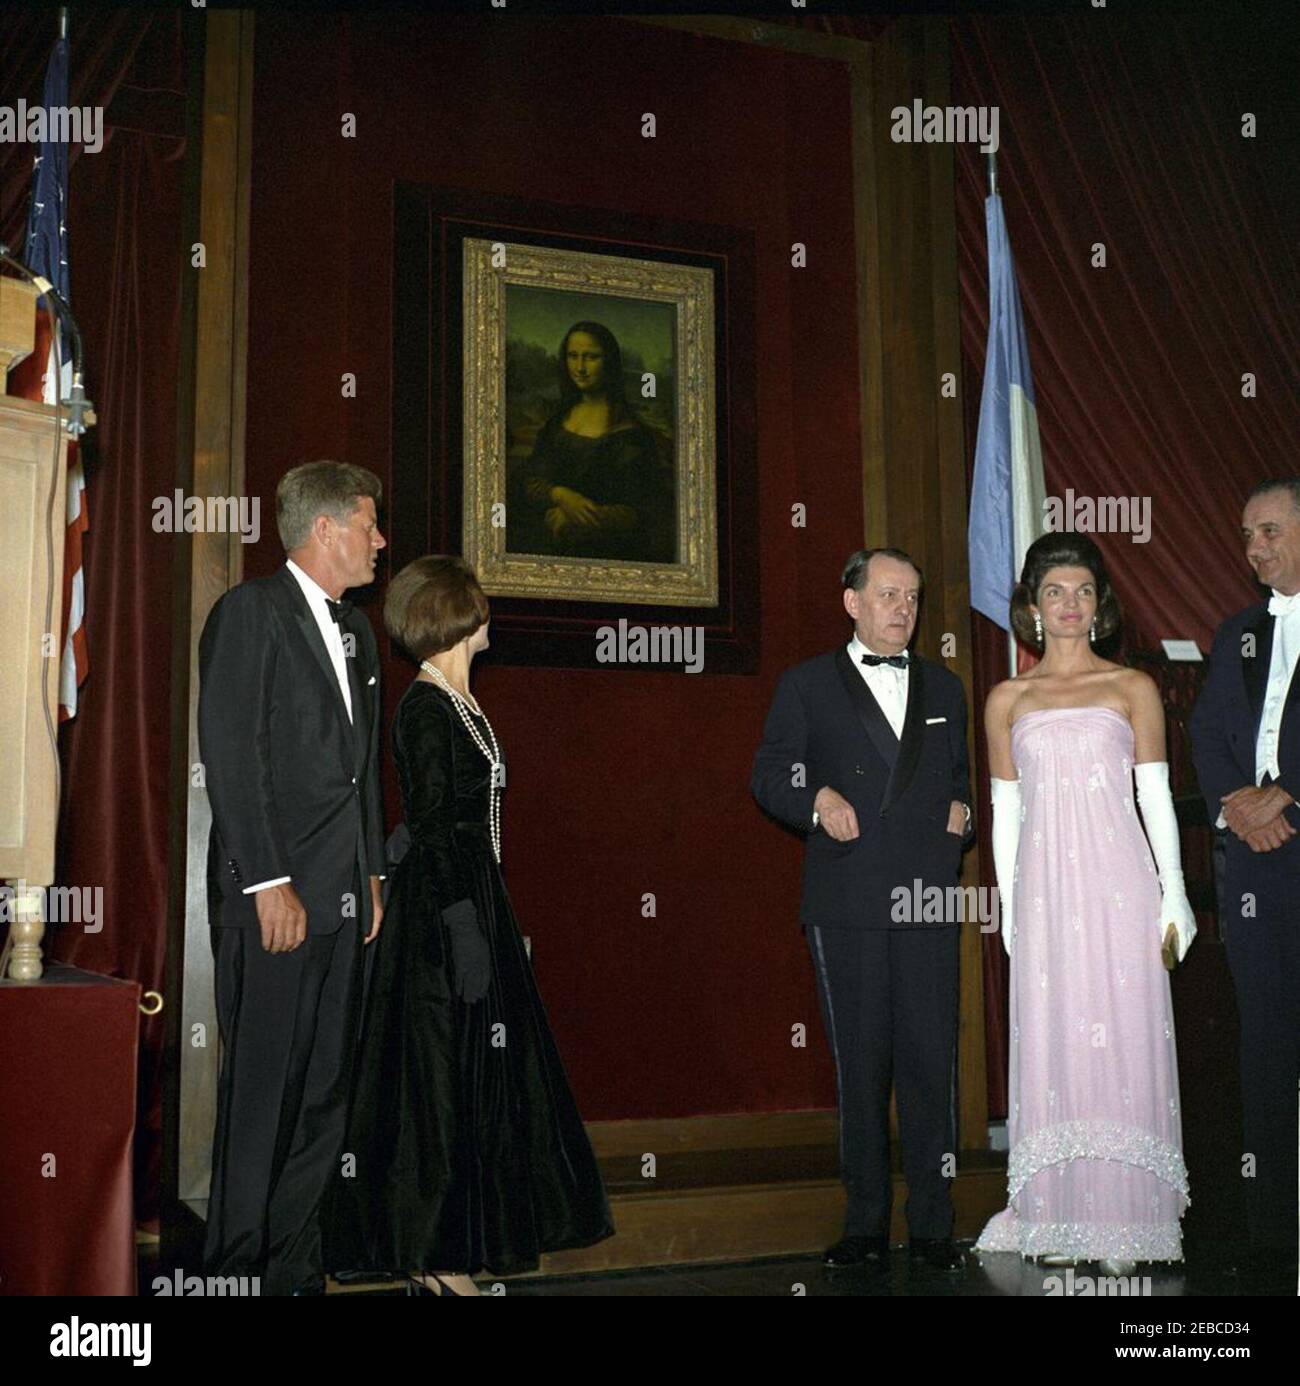 Opening ceremony, Mona Lisa Exhibit at the National Gallery of Art, President Kennedy and First Lady Jacqueline Kennedy (JBK), 10:00PM. President John F. Kennedy and First Lady Jacqueline Kennedy stand before the Mona Lisa at the opening of a temporary exhibition of the painting at the National Gallery of Art, Washington, D.C. (L-R) President Kennedy; pianist Madeleine Malraux (wife of Minister of State for Cultural Affairs of France, Andru00e9 Malraux); Minister Malraux; First Lady Jacqueline Kennedy; Vice President Lyndon Johnson. Stock Photo